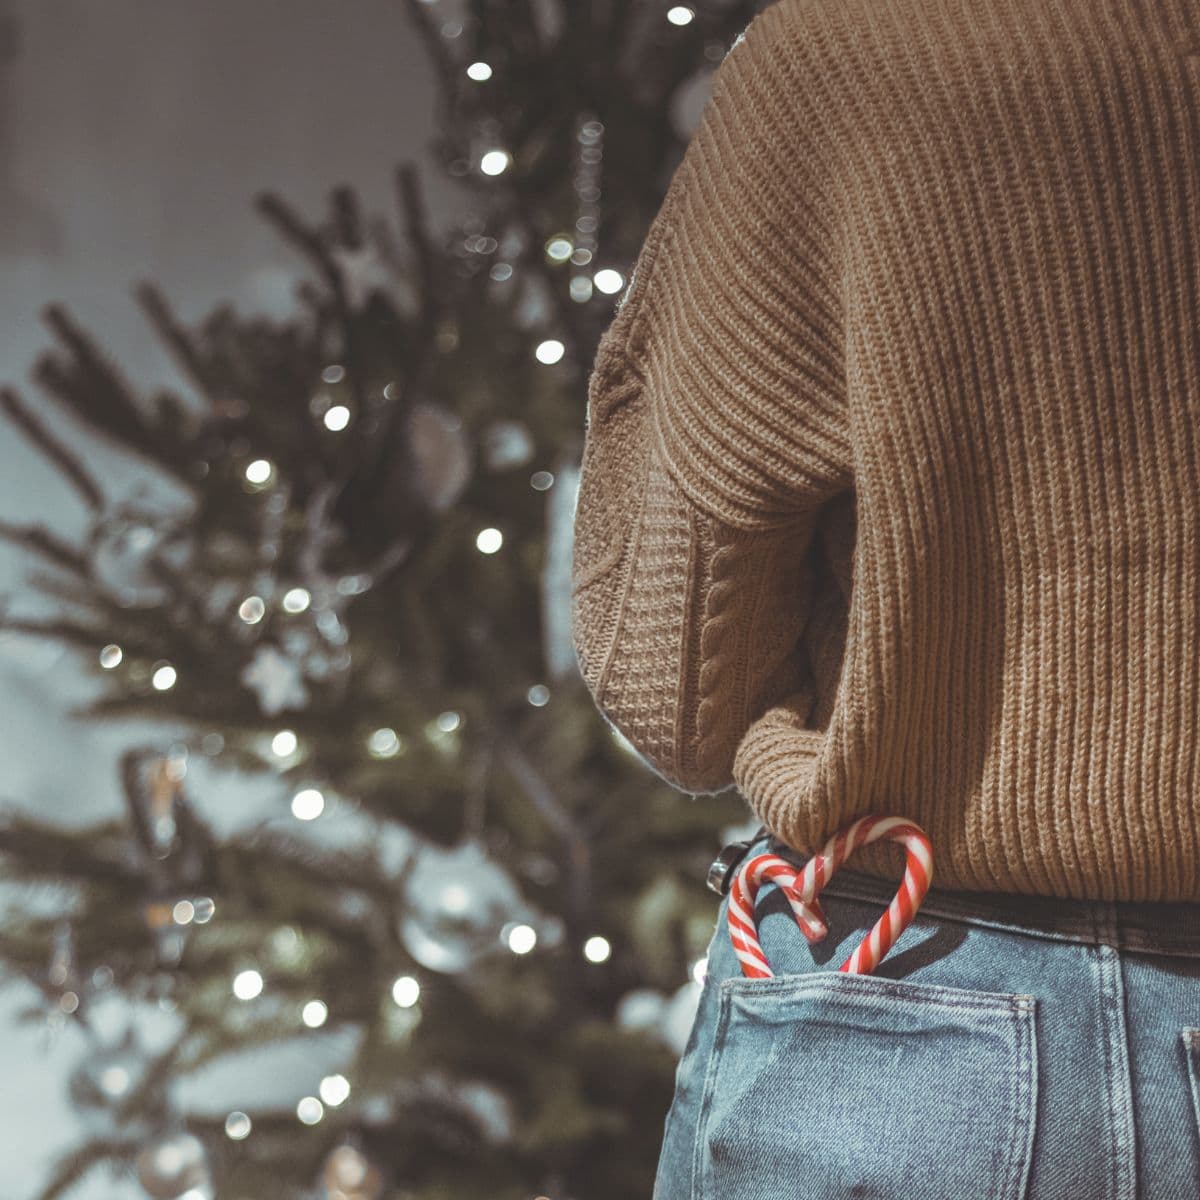 A woman enjoying the JOMO, standing in front of a Christmas tree with candy canes in her back jean pocket.